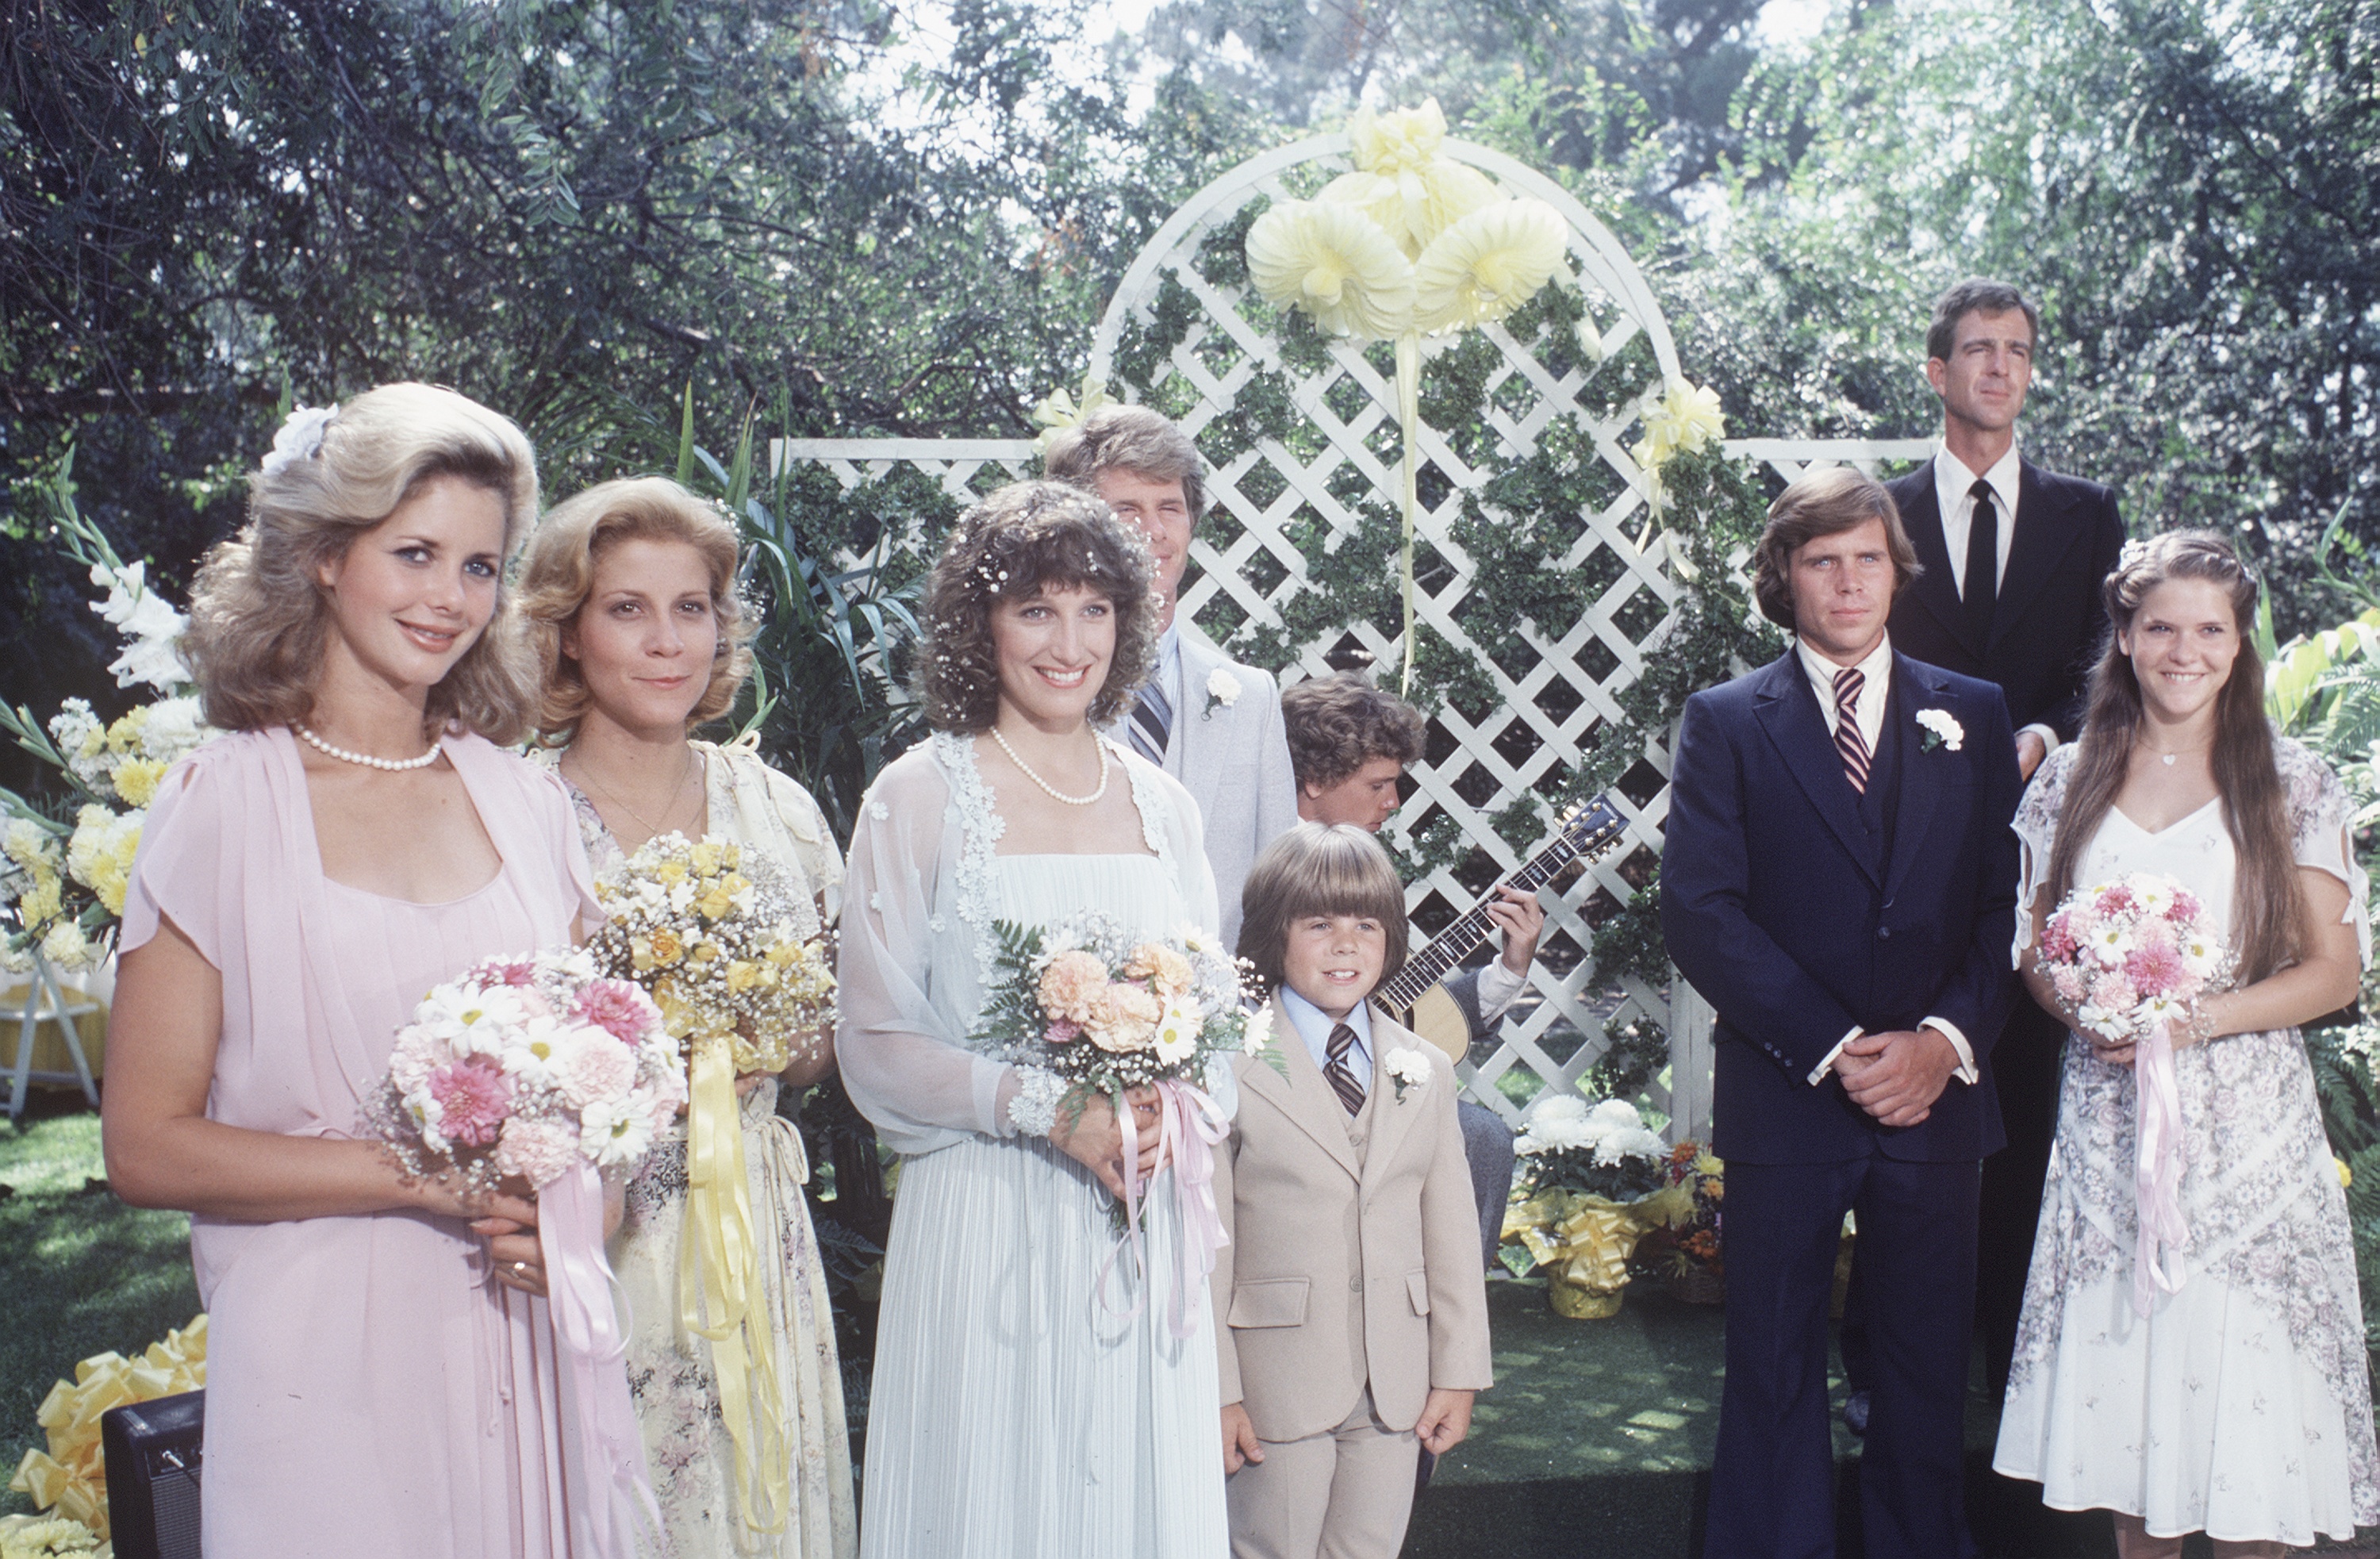 Brian Patrick Clarke, Grant Goodeve, Dianne Kay, Lani O'Grady, Laurie Walters, Adam Rich, Willie Aames, Connie Needham, and Stephen Keep on "Eight is Enough" | Source: Getty Images